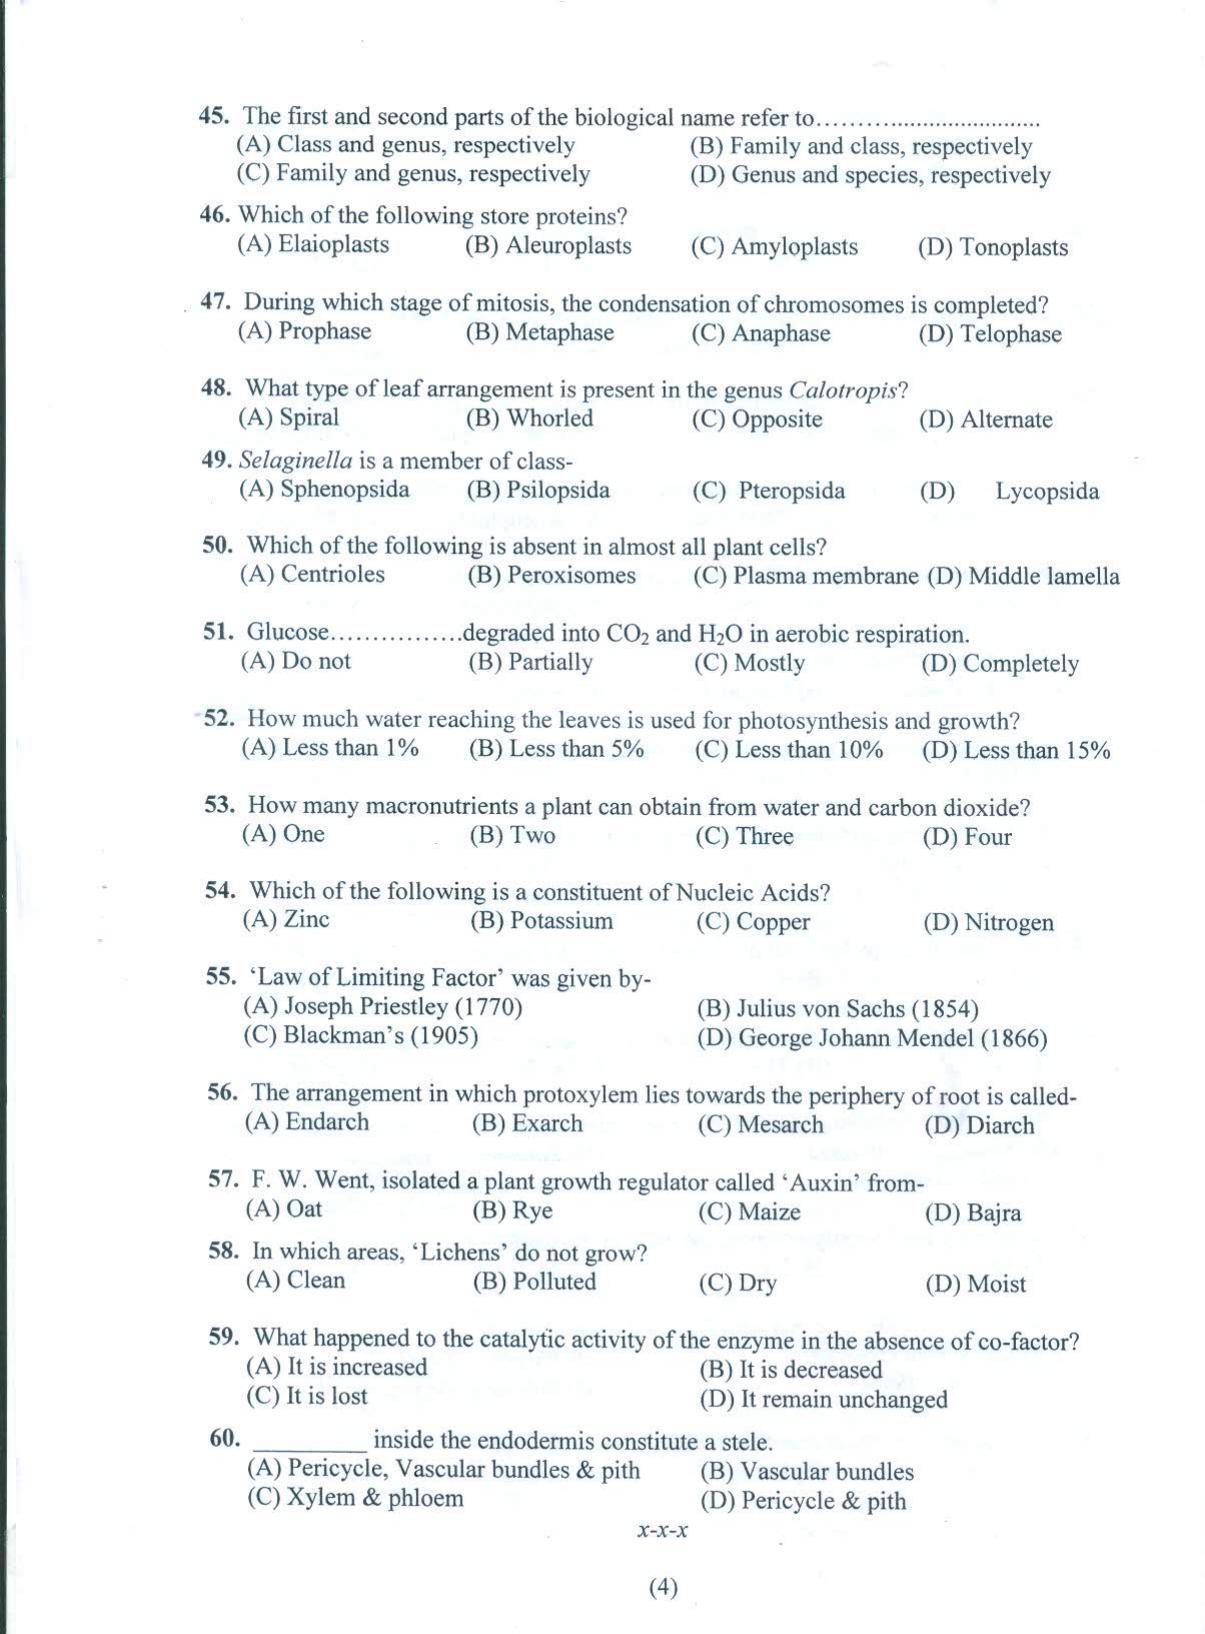 PUCET UG 2021 Biology Question Paper - Page 5